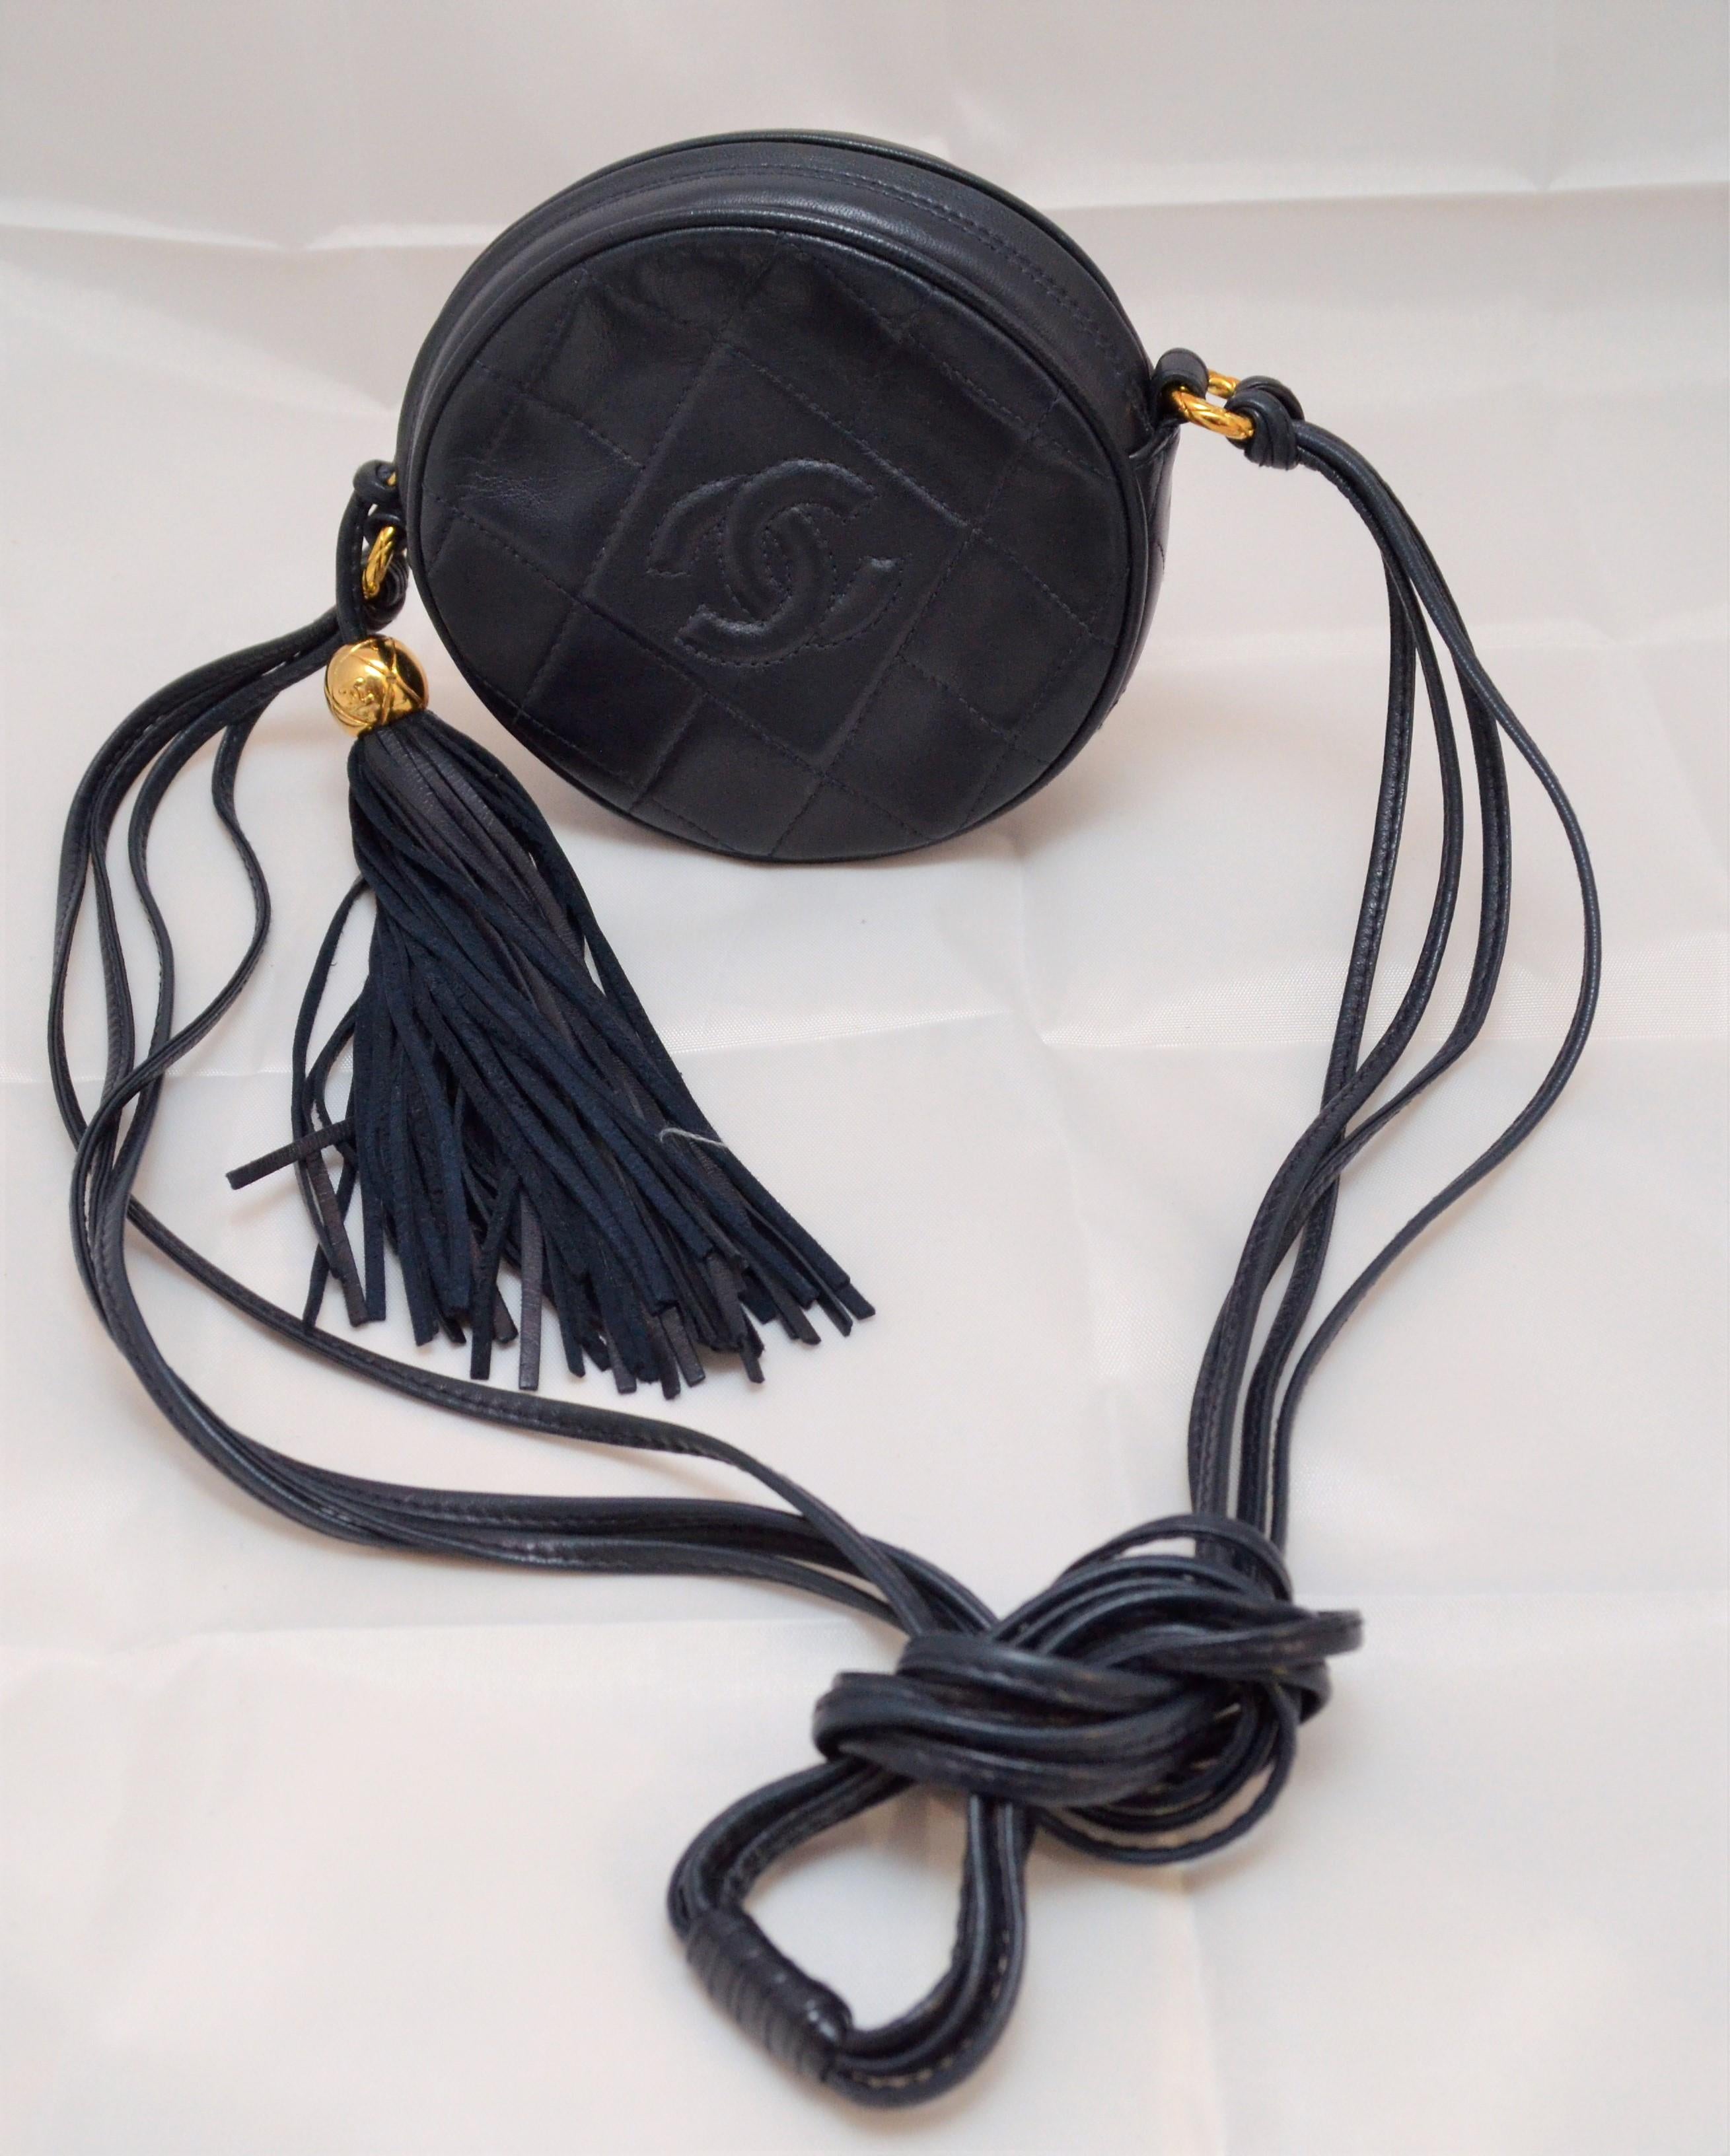 Chanel Vintage 1990's Navy Leather Circle Crossbody Bag --- Featured in navy quilted leather with an embossed signature CC at the front, zippered closure with a leather tassel zipper pull, interior fully lined in leather, made in Italy. Bag is in